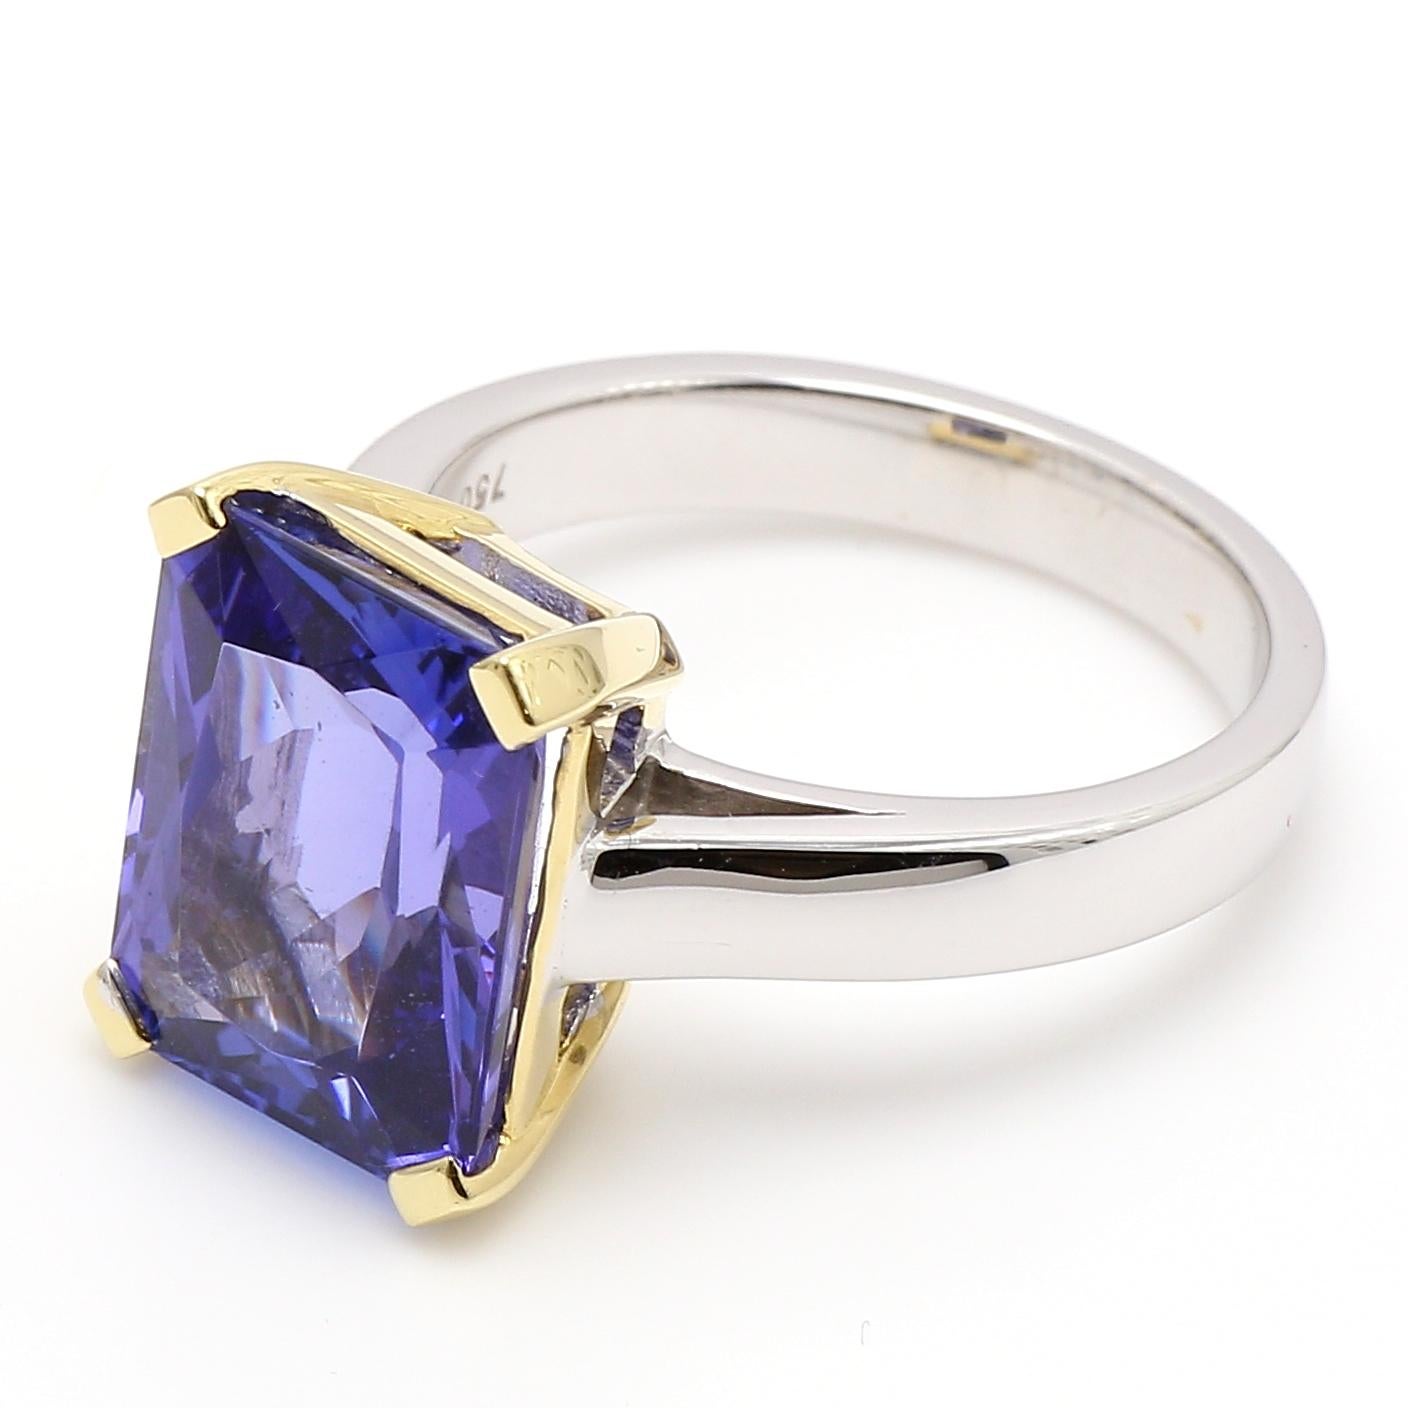 Handcrafted 18 Karat White and Yellow Gold Solitaire Cocktail Ring.
Radiant Cut Tanzanite 6.82ct  VAAA color, VVS clarity.
Graded by Ayanda Tanzanite inline with International Tanzanite Grading
Size 6 3/4 USA, the ring can be sized two sizes up and